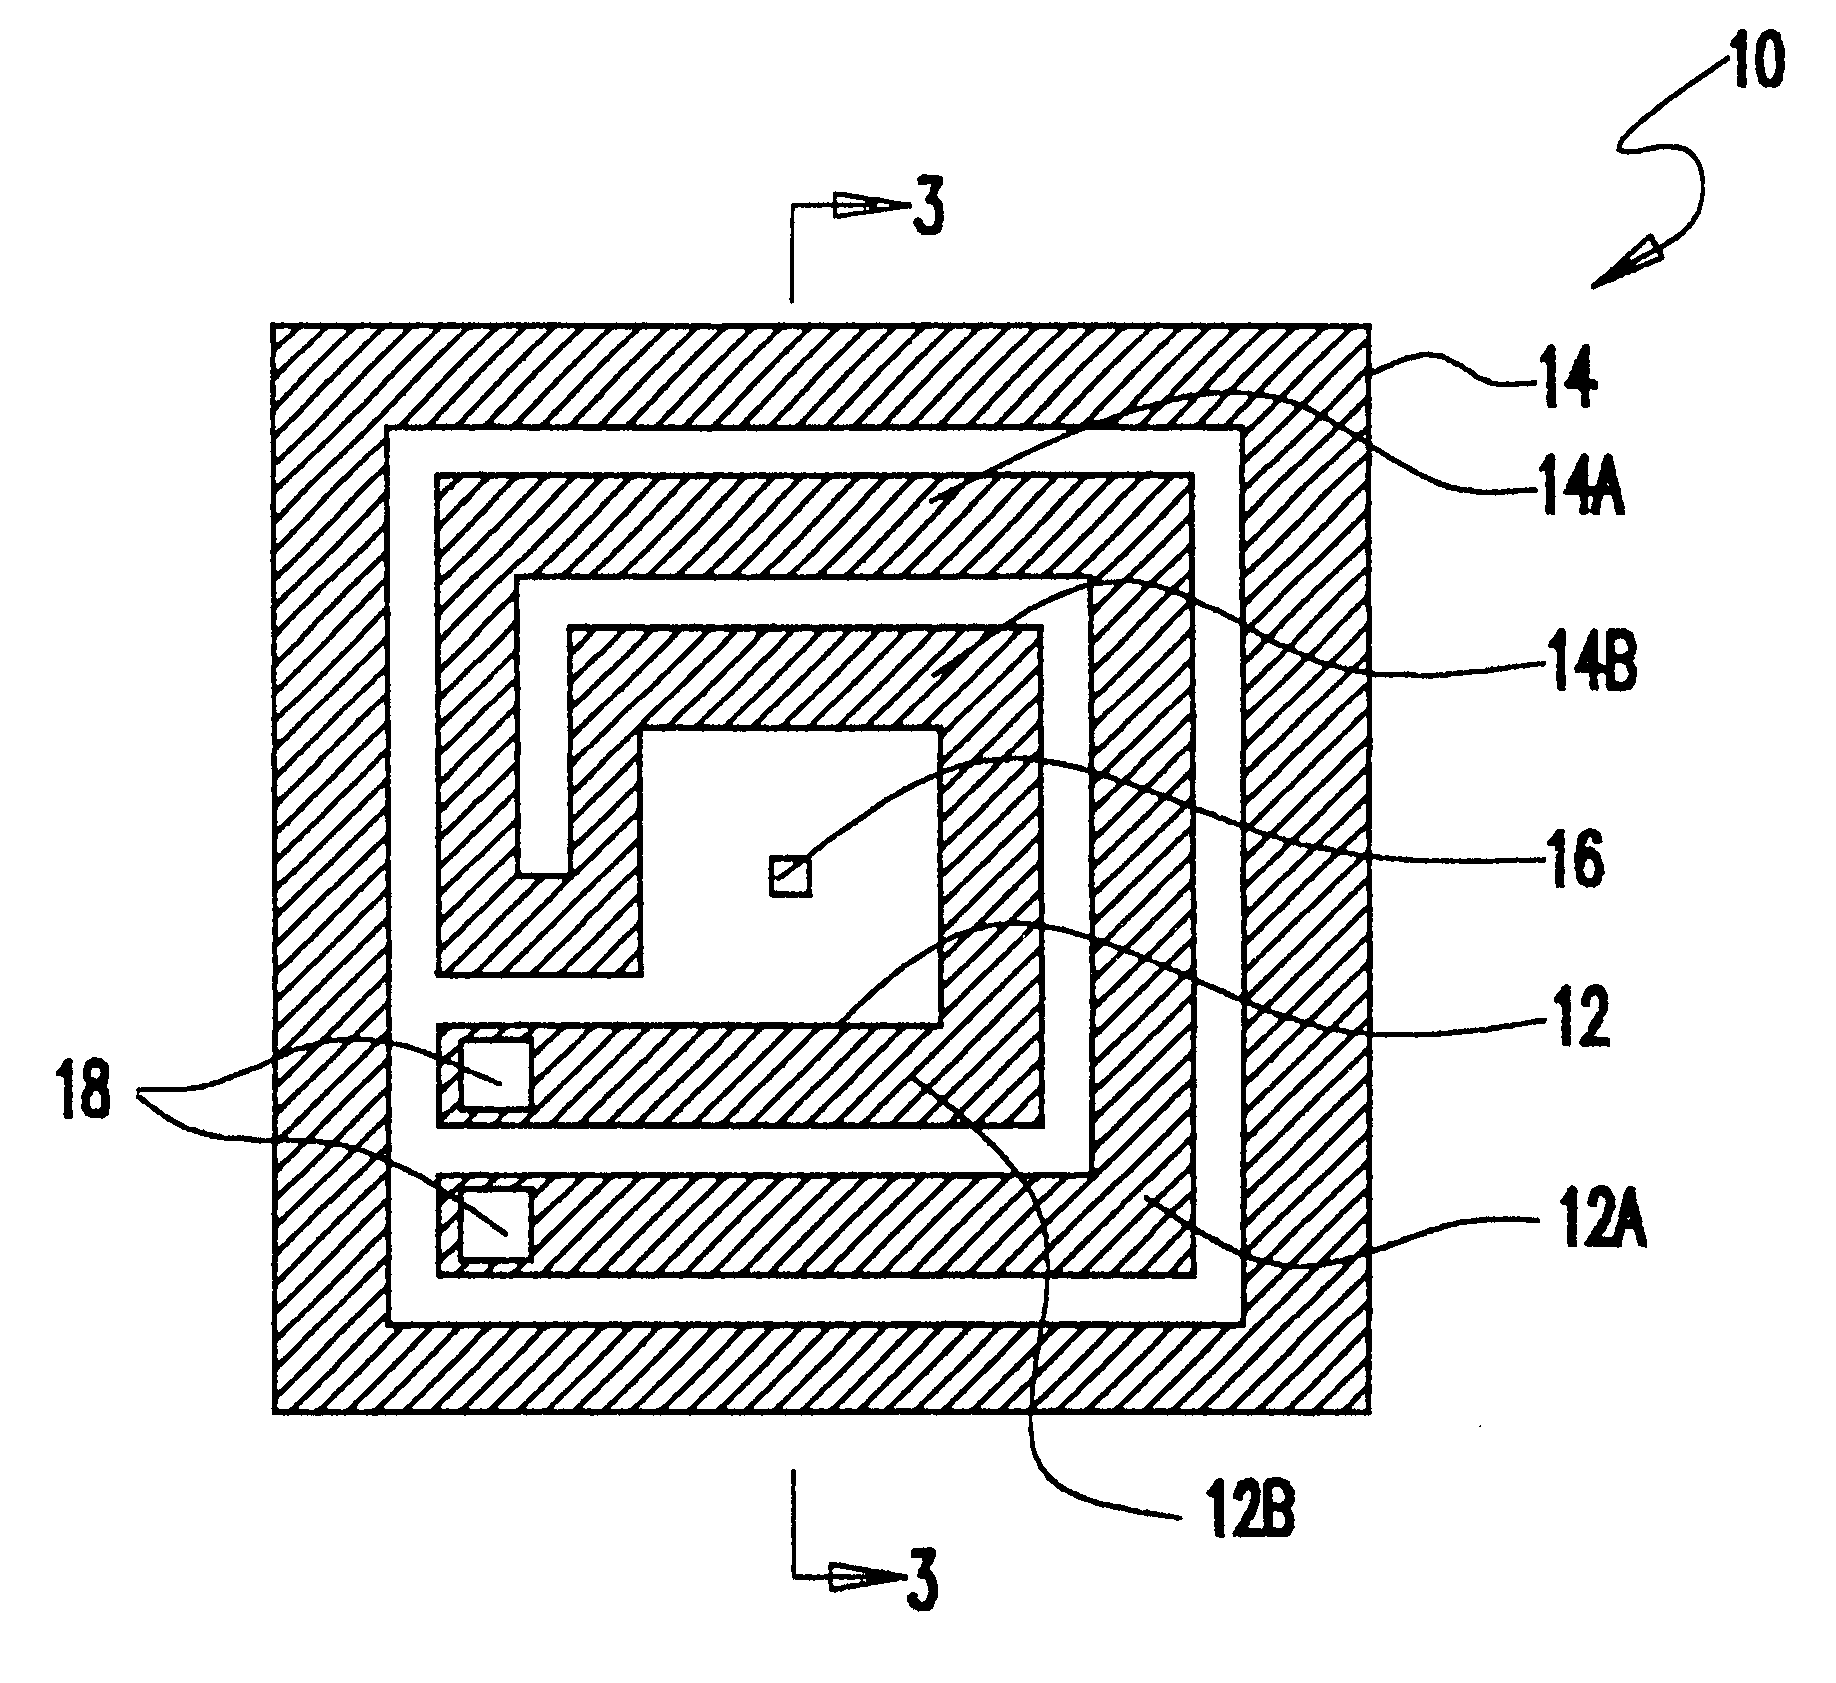 E-beam shape aperature incorporating lithographically defined heater element